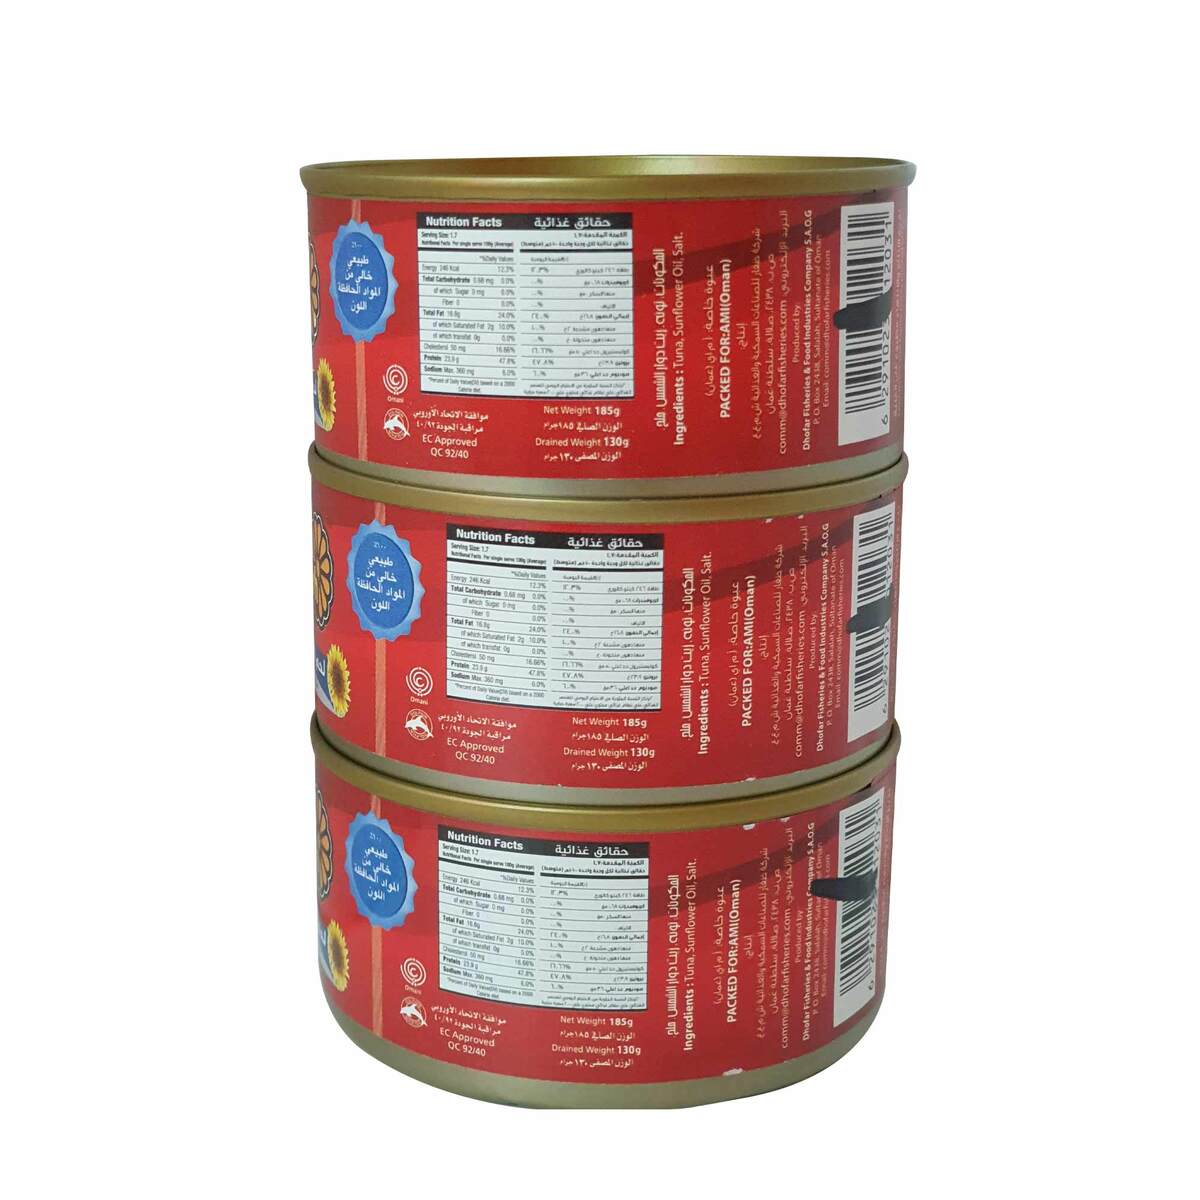 Daily Fresh Light Meat Tuna In Sunflower Oil Value Pack 3 x 185g